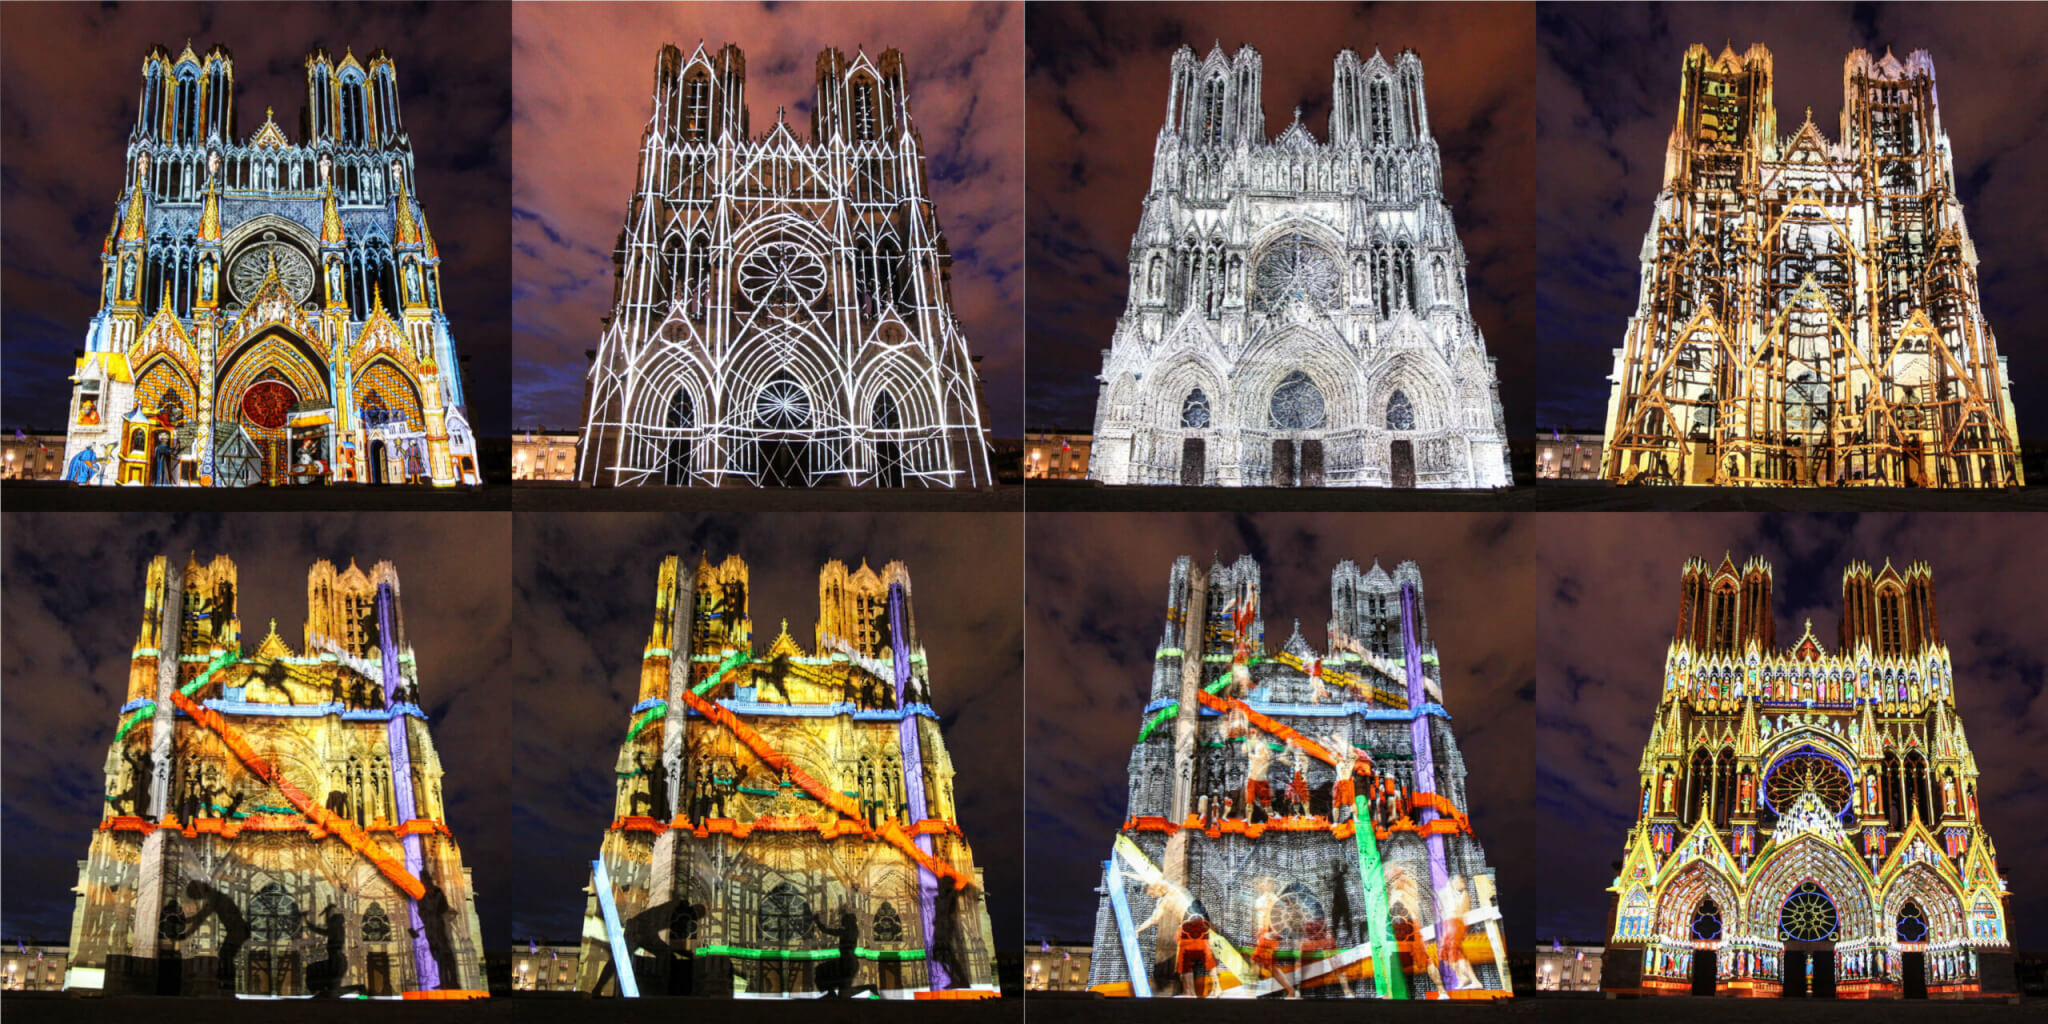 The Reims Cathedral illuminated with stunning animated patterns during a light show at night